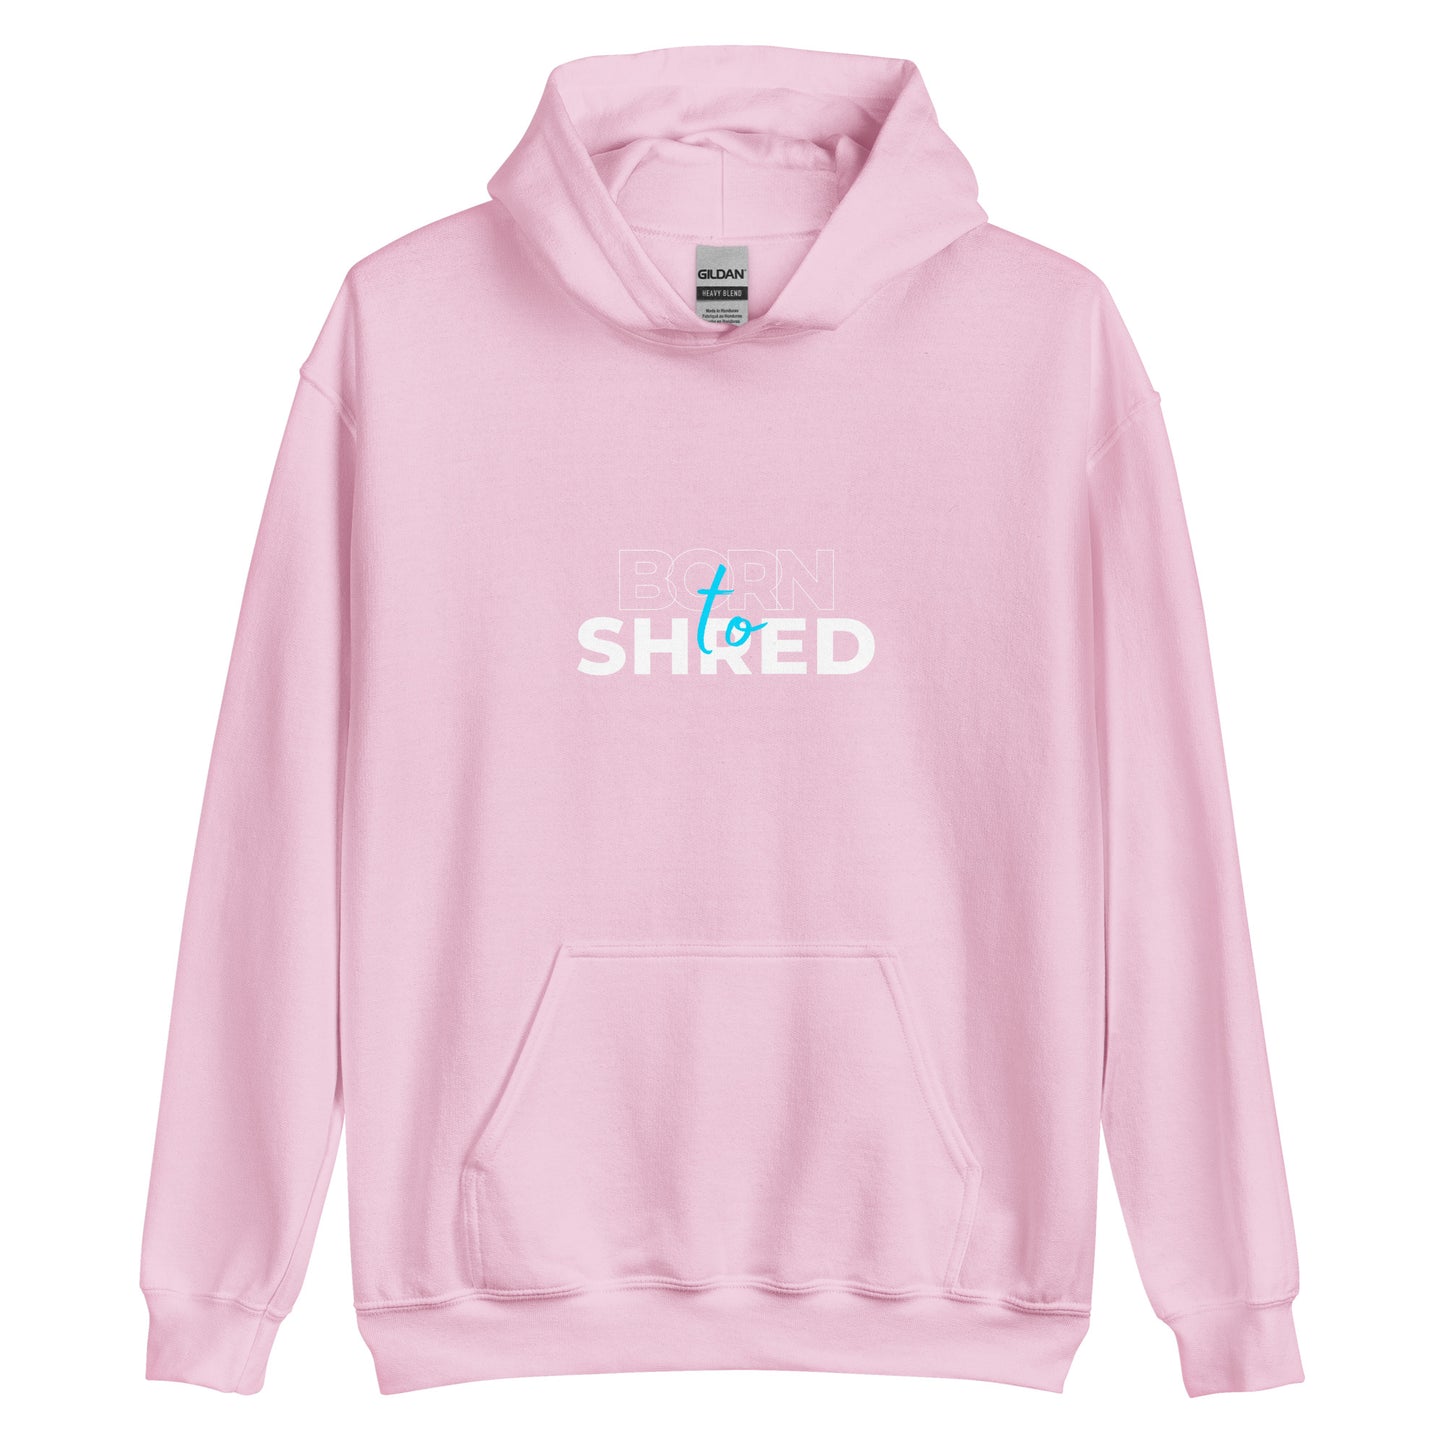 Born To Shred Unisex Hoodie